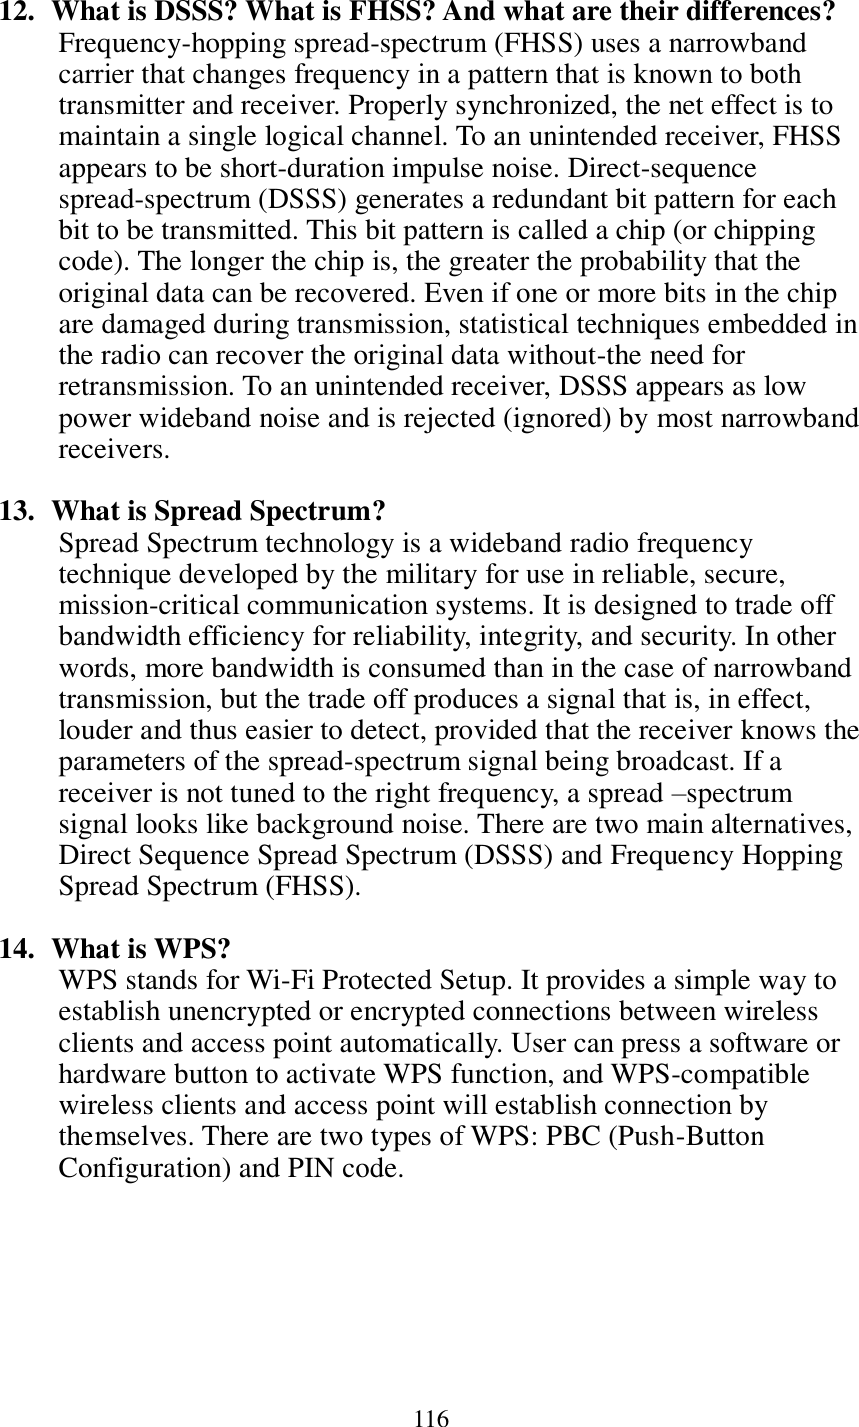 116   12.   What is DSSS? What is FHSS? And what are their differences? Frequency-hopping spread-spectrum (FHSS) uses a narrowband carrier that changes frequency in a pattern that is known to both transmitter and receiver. Properly synchronized, the net effect is to maintain a single logical channel. To an unintended receiver, FHSS appears to be short-duration impulse noise. Direct-sequence spread-spectrum (DSSS) generates a redundant bit pattern for each bit to be transmitted. This bit pattern is called a chip (or chipping code). The longer the chip is, the greater the probability that the original data can be recovered. Even if one or more bits in the chip are damaged during transmission, statistical techniques embedded in the radio can recover the original data without-the need for retransmission. To an unintended receiver, DSSS appears as low power wideband noise and is rejected (ignored) by most narrowband receivers.  13.   What is Spread Spectrum? Spread Spectrum technology is a wideband radio frequency technique developed by the military for use in reliable, secure, mission-critical communication systems. It is designed to trade off bandwidth efficiency for reliability, integrity, and security. In other words, more bandwidth is consumed than in the case of narrowband transmission, but the trade off produces a signal that is, in effect, louder and thus easier to detect, provided that the receiver knows the parameters of the spread-spectrum signal being broadcast. If a receiver is not tuned to the right frequency, a spread –spectrum signal looks like background noise. There are two main alternatives, Direct Sequence Spread Spectrum (DSSS) and Frequency Hopping Spread Spectrum (FHSS).  14.   What is WPS? WPS stands for Wi-Fi Protected Setup. It provides a simple way to establish unencrypted or encrypted connections between wireless clients and access point automatically. User can press a software or hardware button to activate WPS function, and WPS-compatible wireless clients and access point will establish connection by themselves. There are two types of WPS: PBC (Push-Button Configuration) and PIN code. 